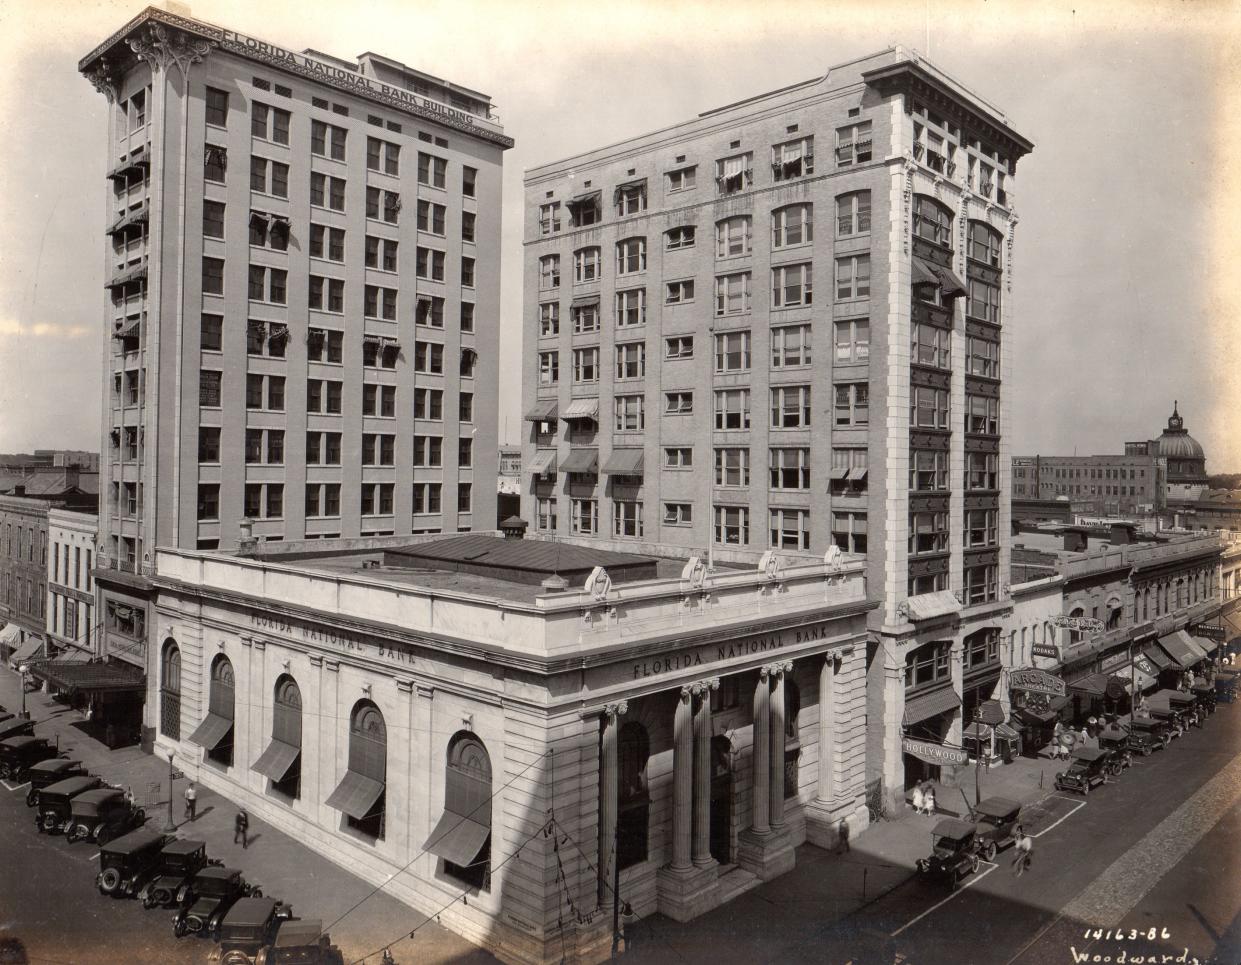 The Laura Street Trio buildings, shown here in 1927, were once the vibrant heart of the city of Jacksonville.